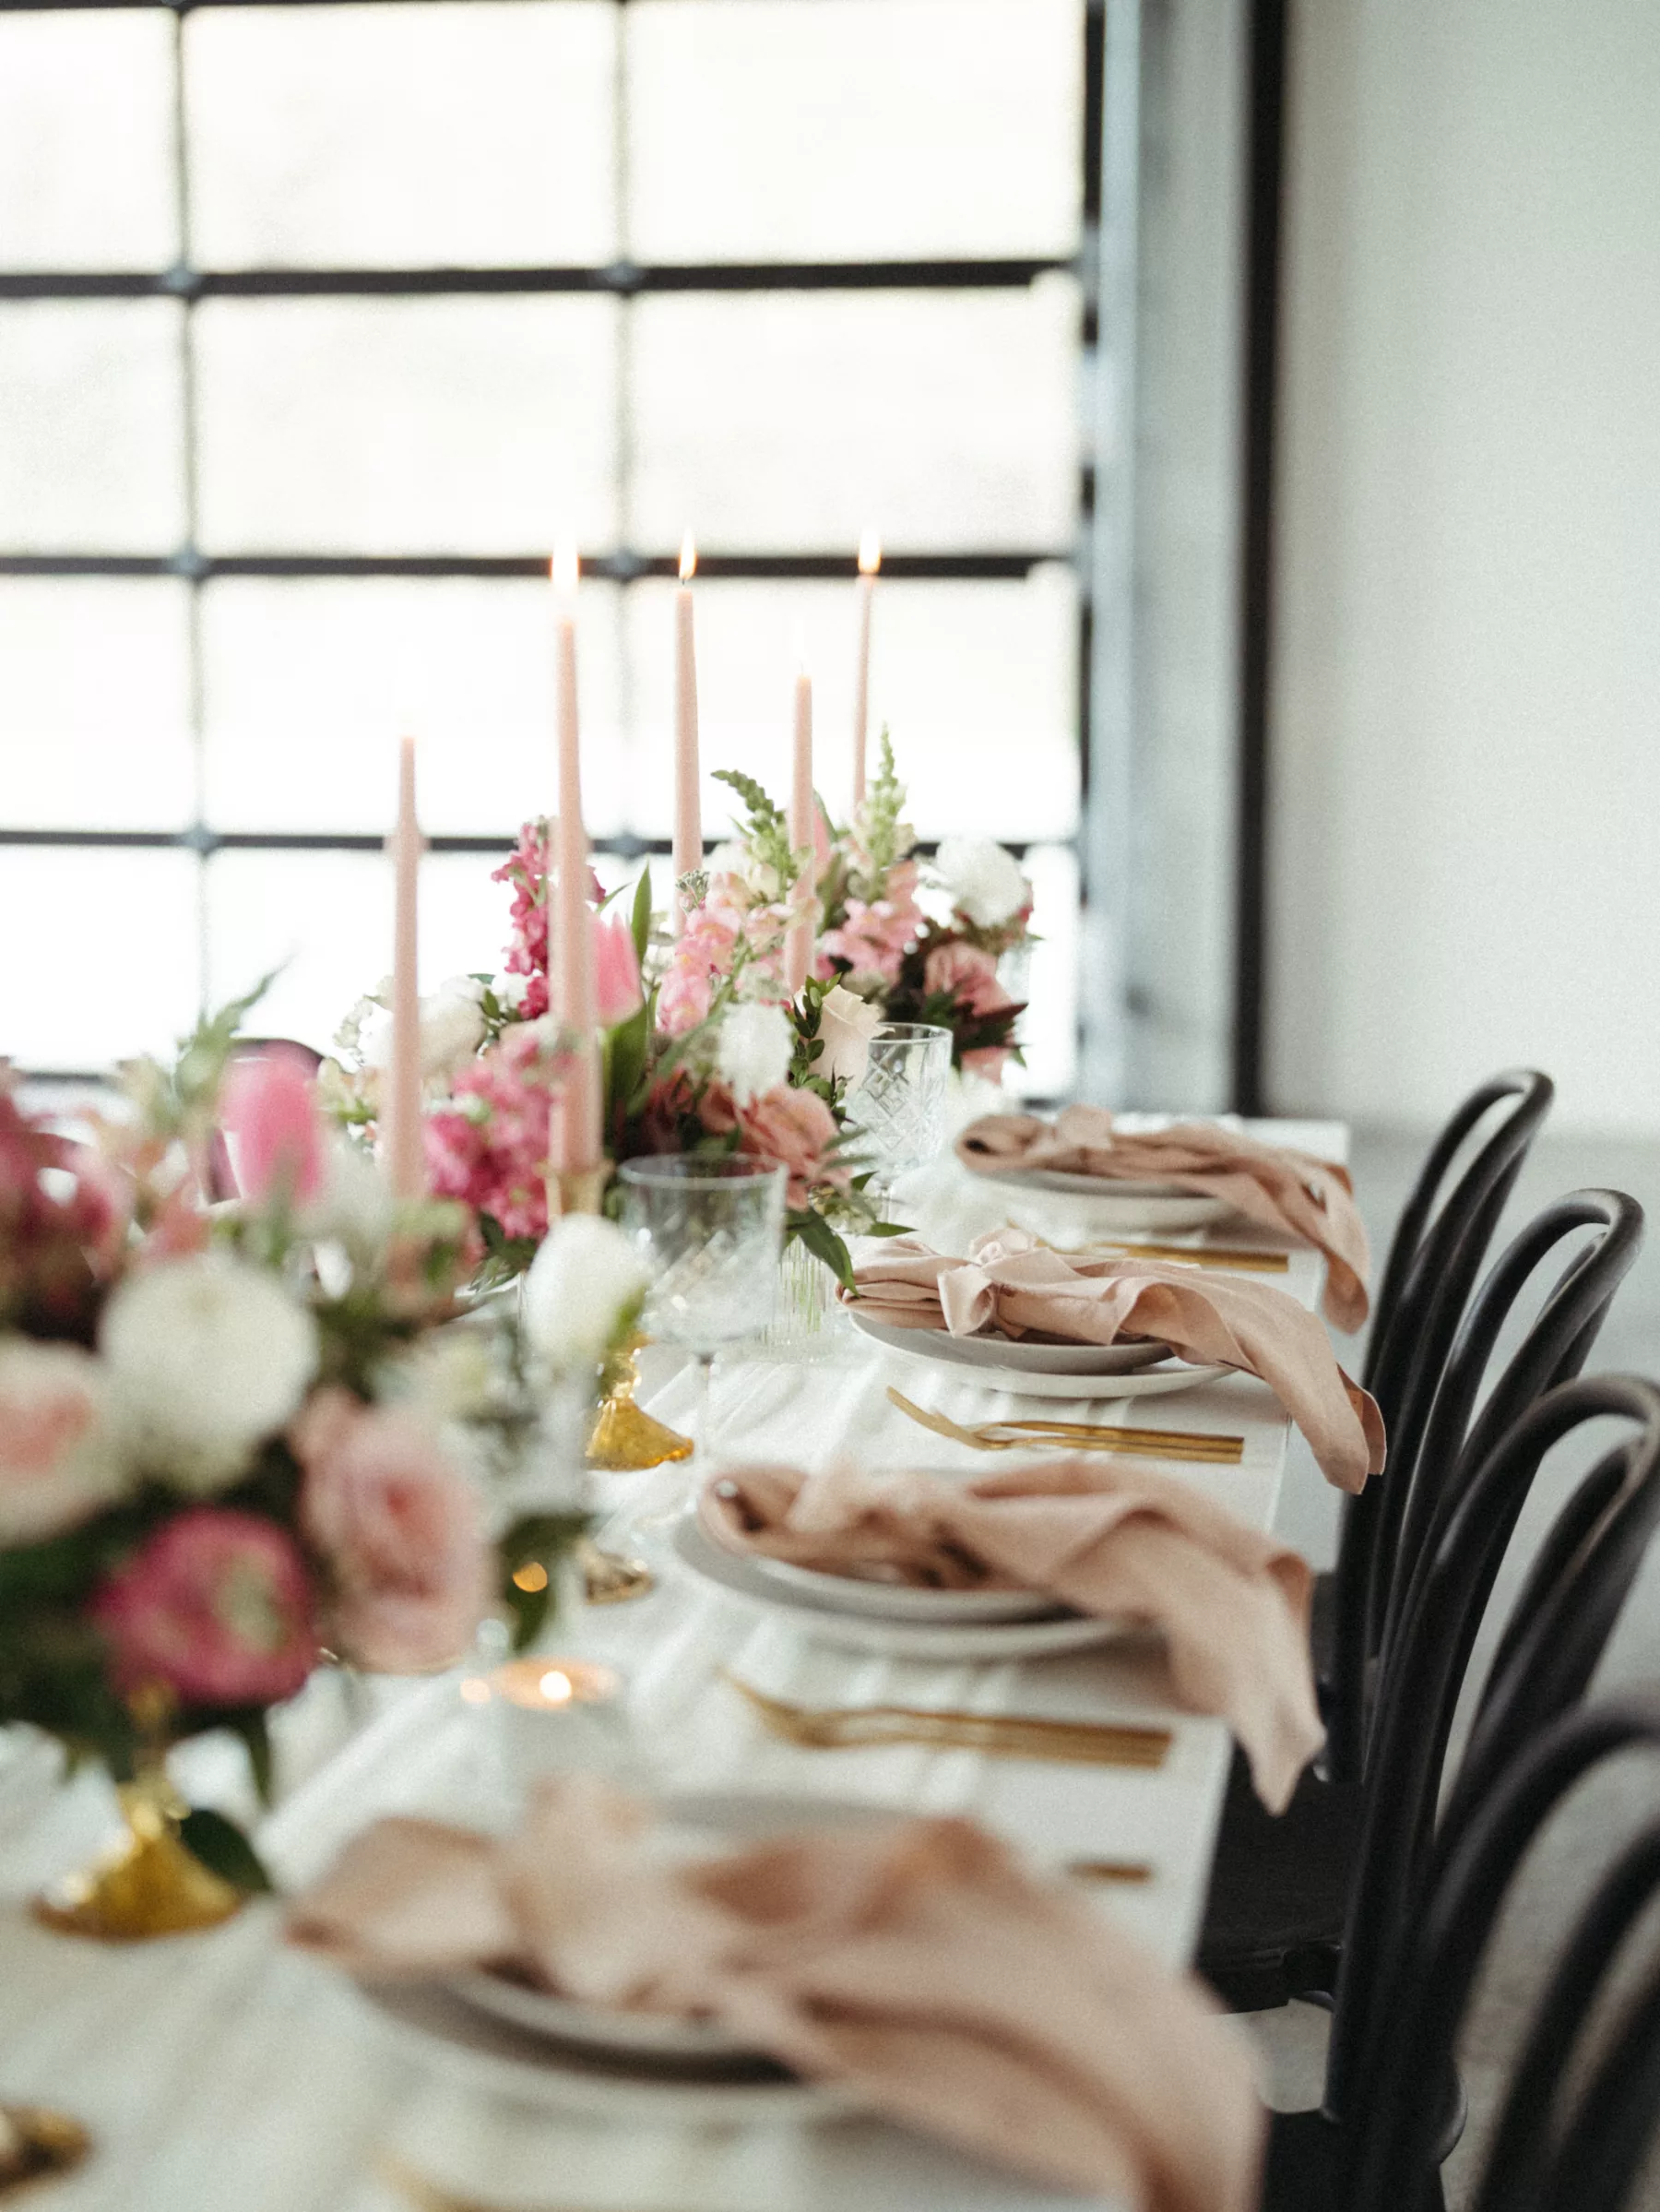 Romantic Pink Wedding Reception Tablescape Place Setting Inspiration | White Anemone, Pink Roses, Tulips, and Stock Flower Centerpiece Decor Ideas | Tampa Bay Florist Save The Date Florida